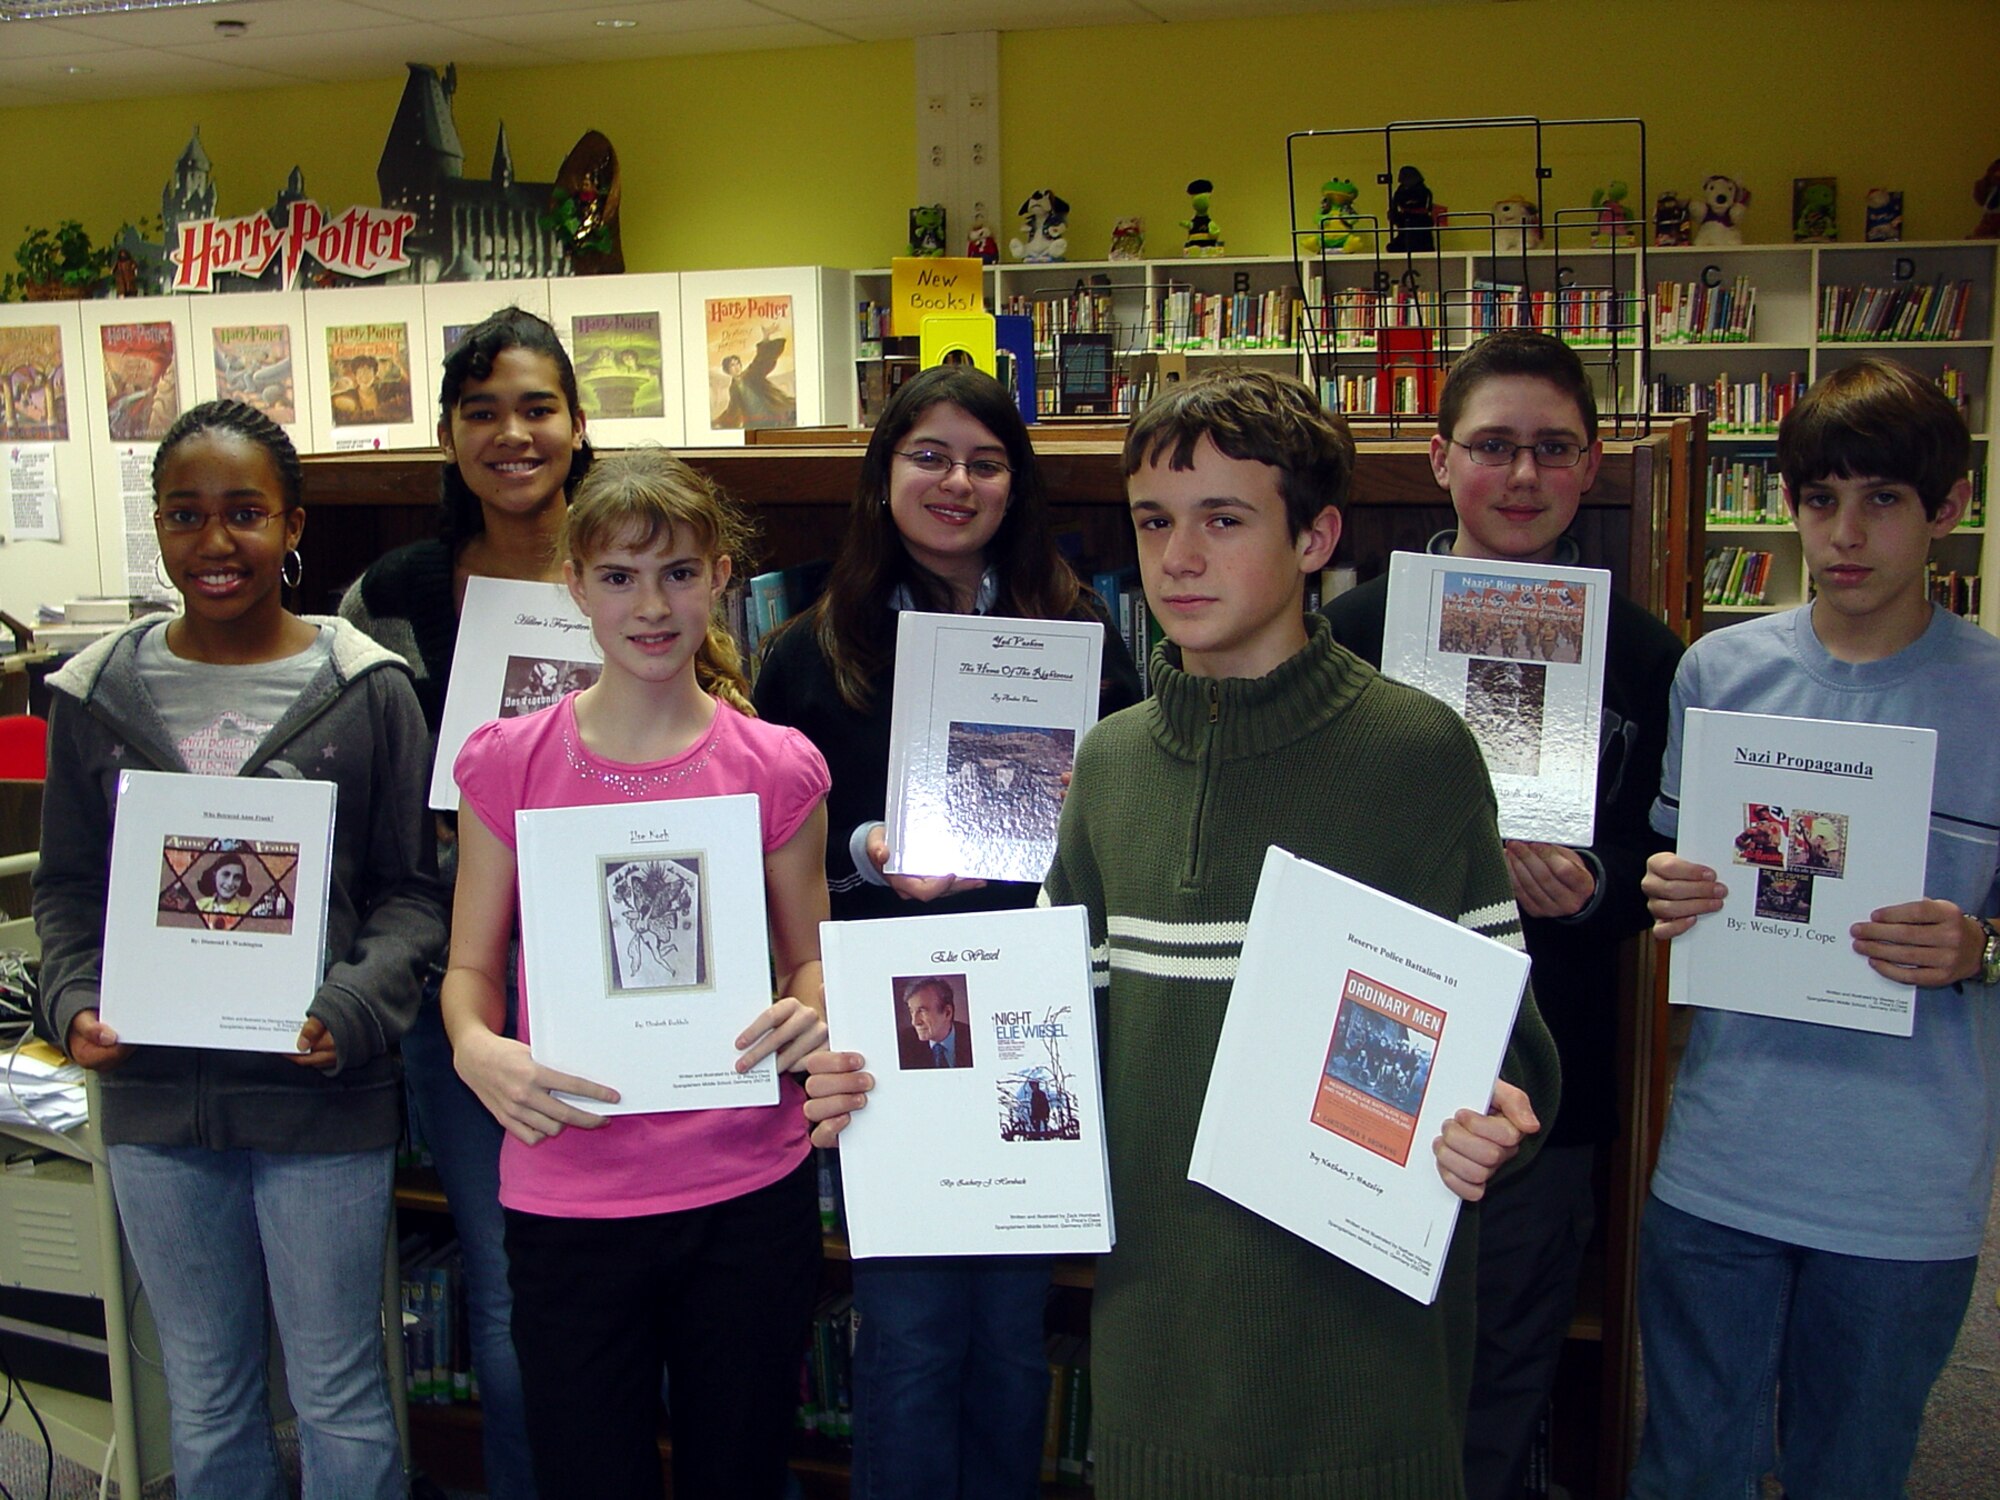 SPANGDAHLEM AIR BASE, Germany -- Students from Spangdahlem Middle School’s seventh and eighth grade gifted education class display books they created while learning about World War II in Europe. The student’s study included a chronological look at the rise of the Nazi party, appointment of Adolf Hitler as Chancellor of Germany, the D Day landings and liberation of the death camps throughout Europe. Each student chose and researched a Holocaust topic and the information they learned was published in hardback book form, which can be viewed at the Spangdahlem Base library.  (Courtesy photo)